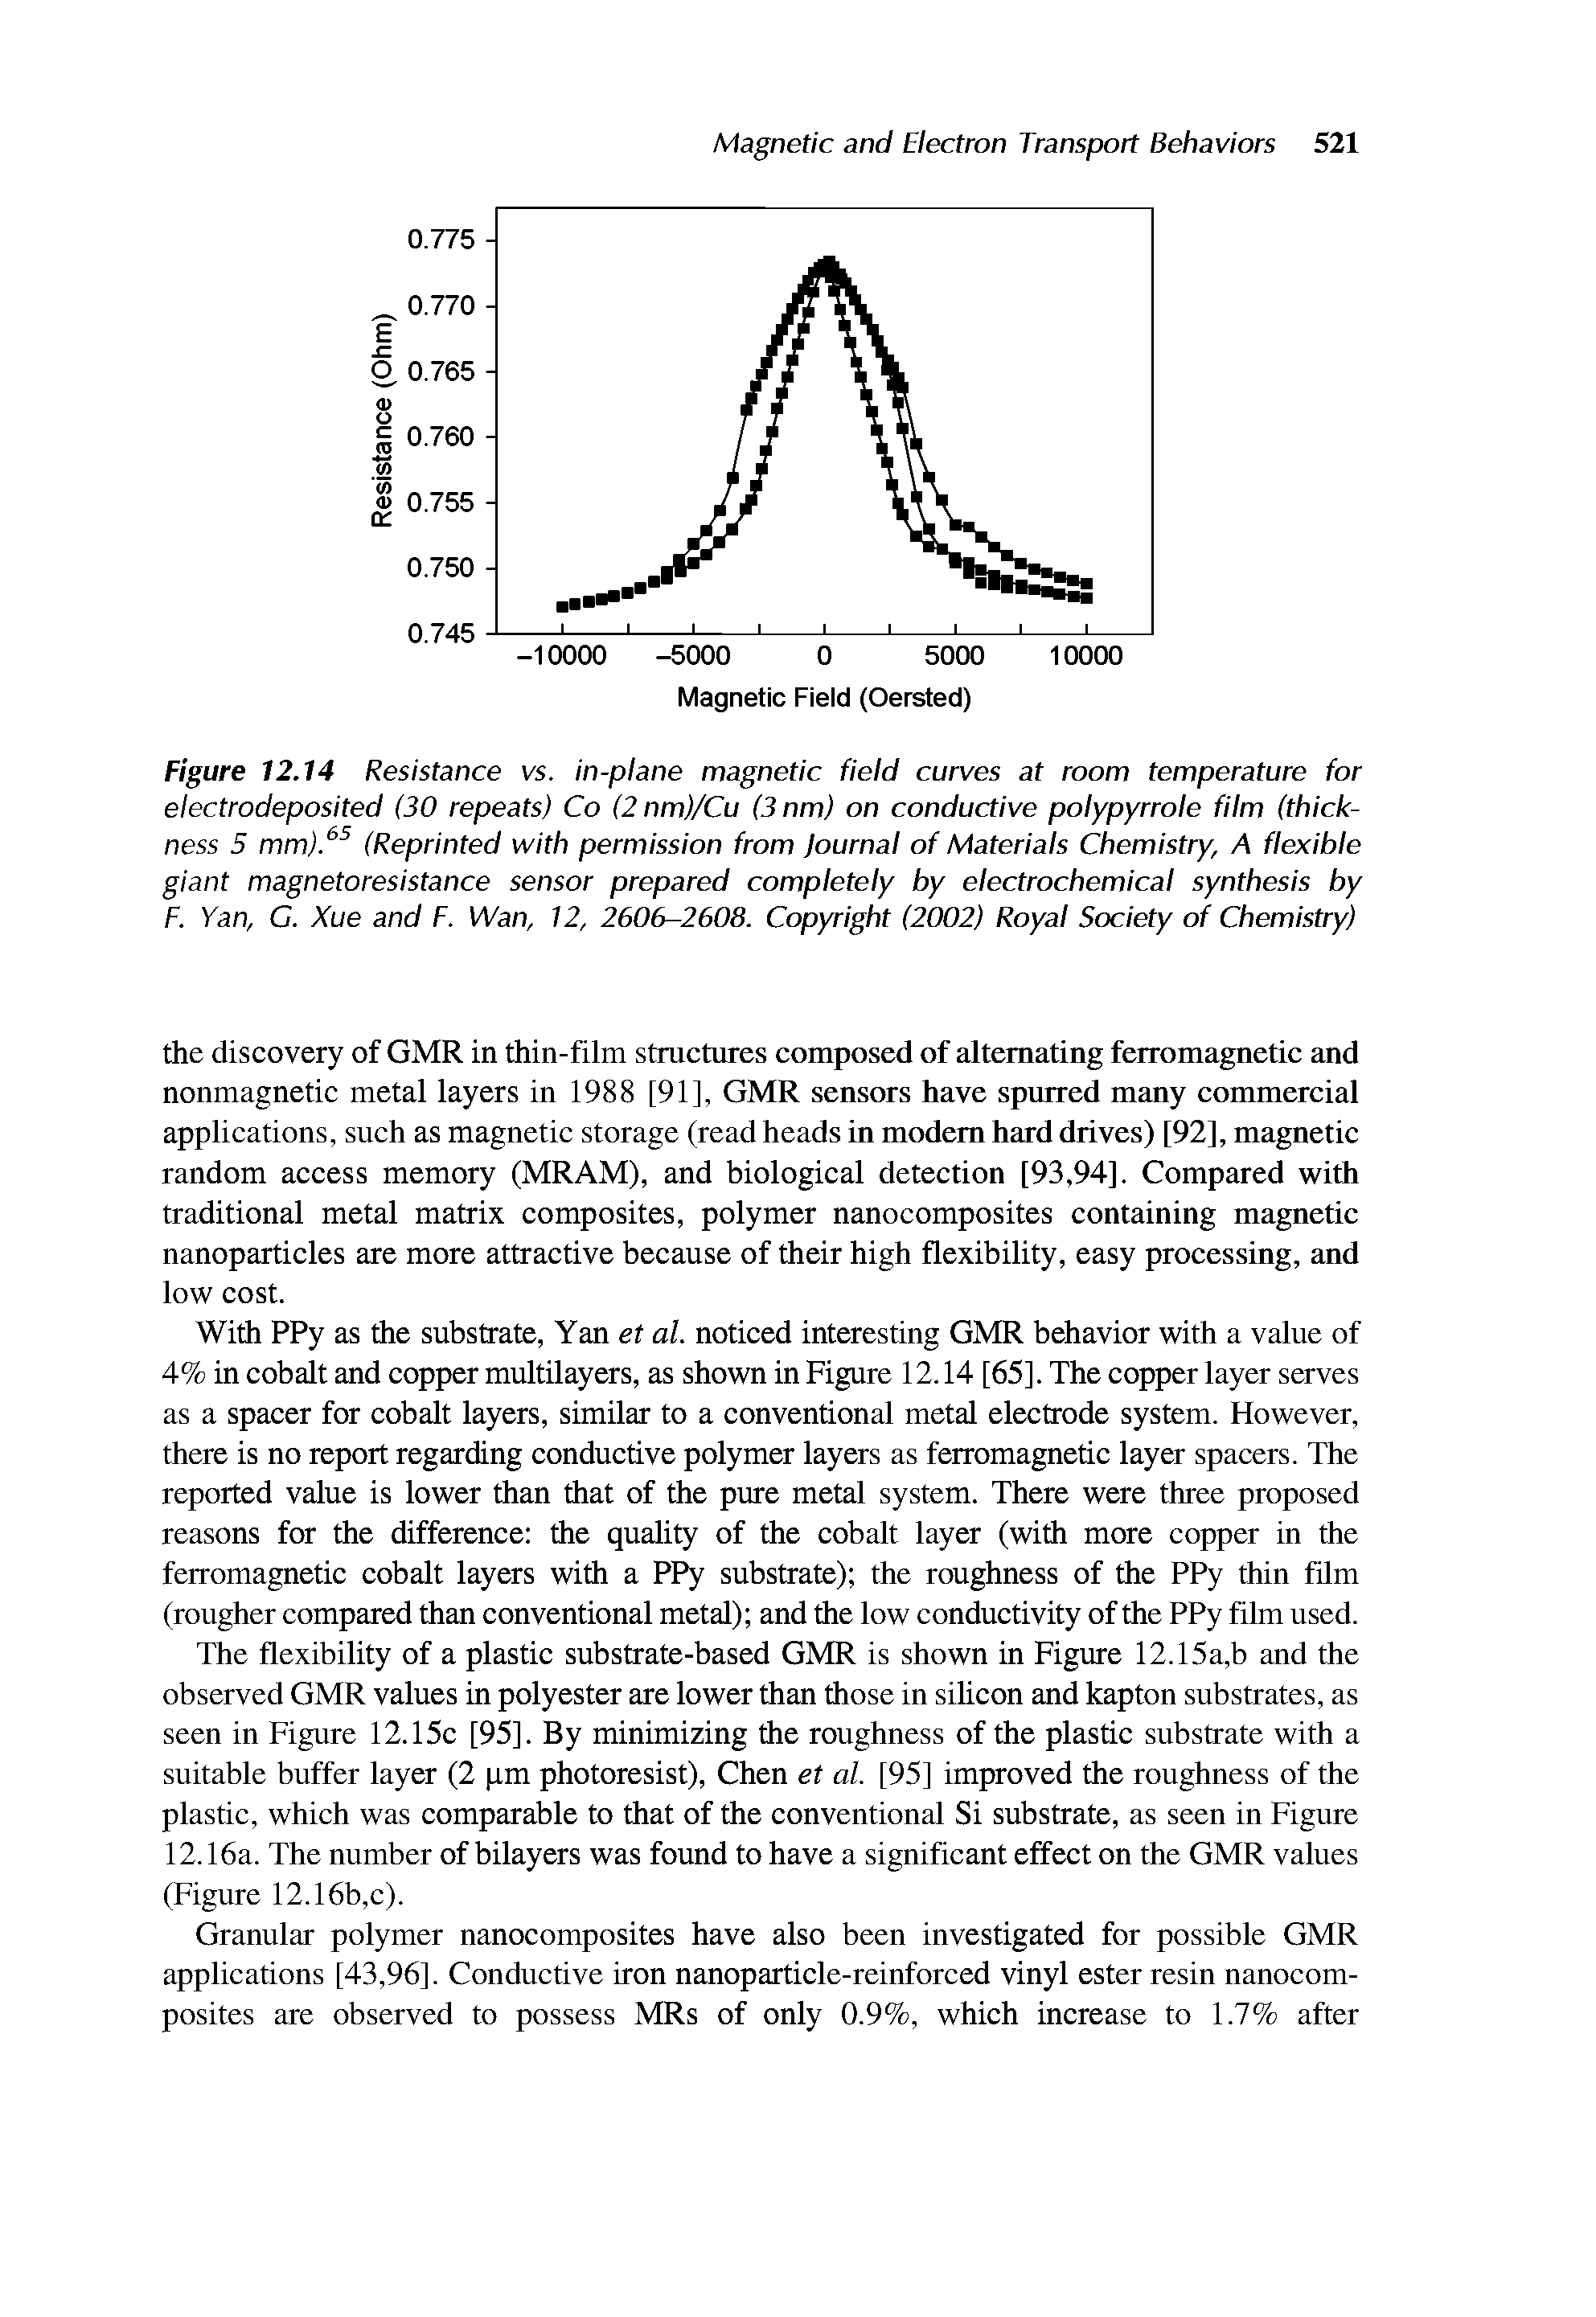 Figure 12.14 Resistance vs. in-plane magnetic field curves at room temperature for electrodeposited (30 repeats) Co (2 nm)/Cu (3 nm) on conductive polypyrrole film (thickness 5 mm). (Reprinted with permission from Journal of Materials Chemistry, A flexible giant magnetoresistance sensor prepared completely by electrochemical synthesis by F. Van, G. Xue and F. Wan, 12, 2606-2608. Copyright (2002) Royal Society of Chemistry)...